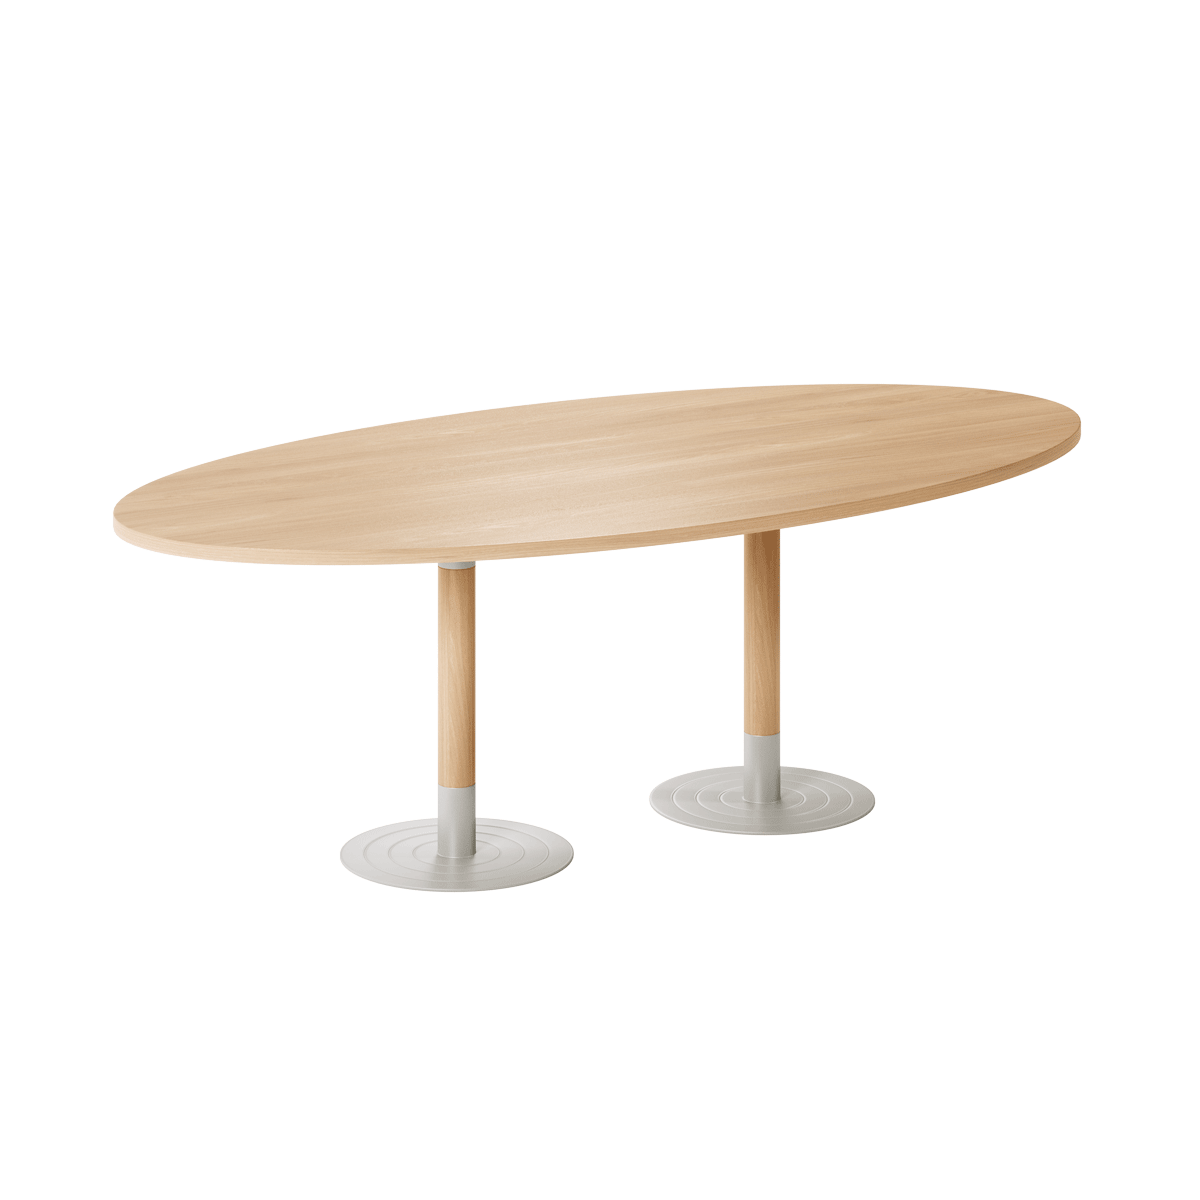 Specialised Aged Care Dining Stem Oval Table - Twin Pedestal